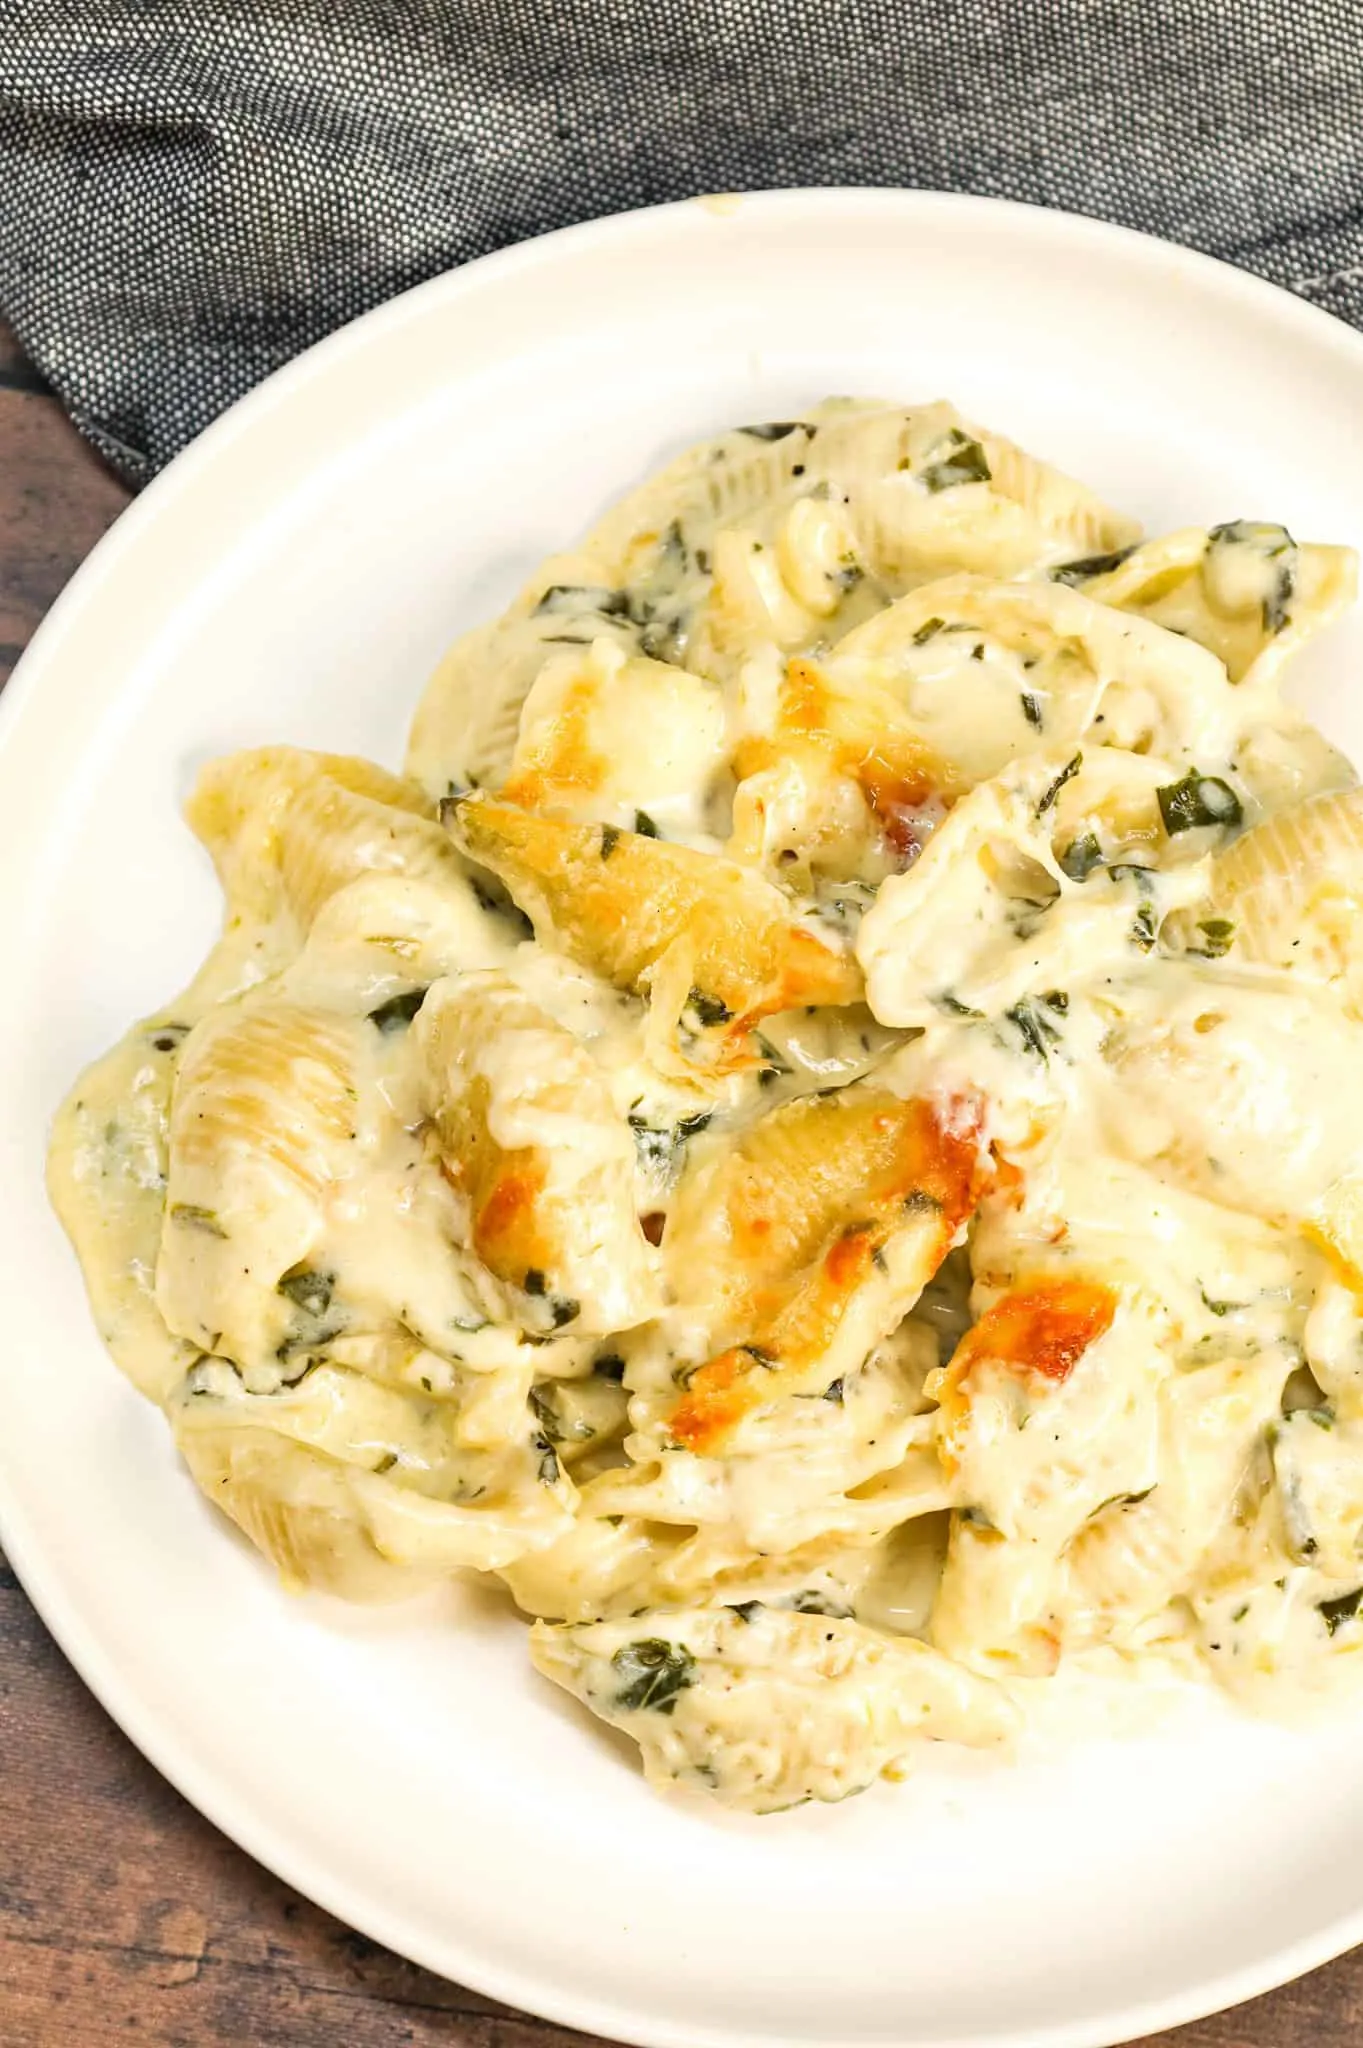 Spinach Artichoke Pasta Bake is a creamy baked pasta recipe loaded with cream cheese, chopped artichoke hearts, chopped spinach, parmesan and mozzarella.